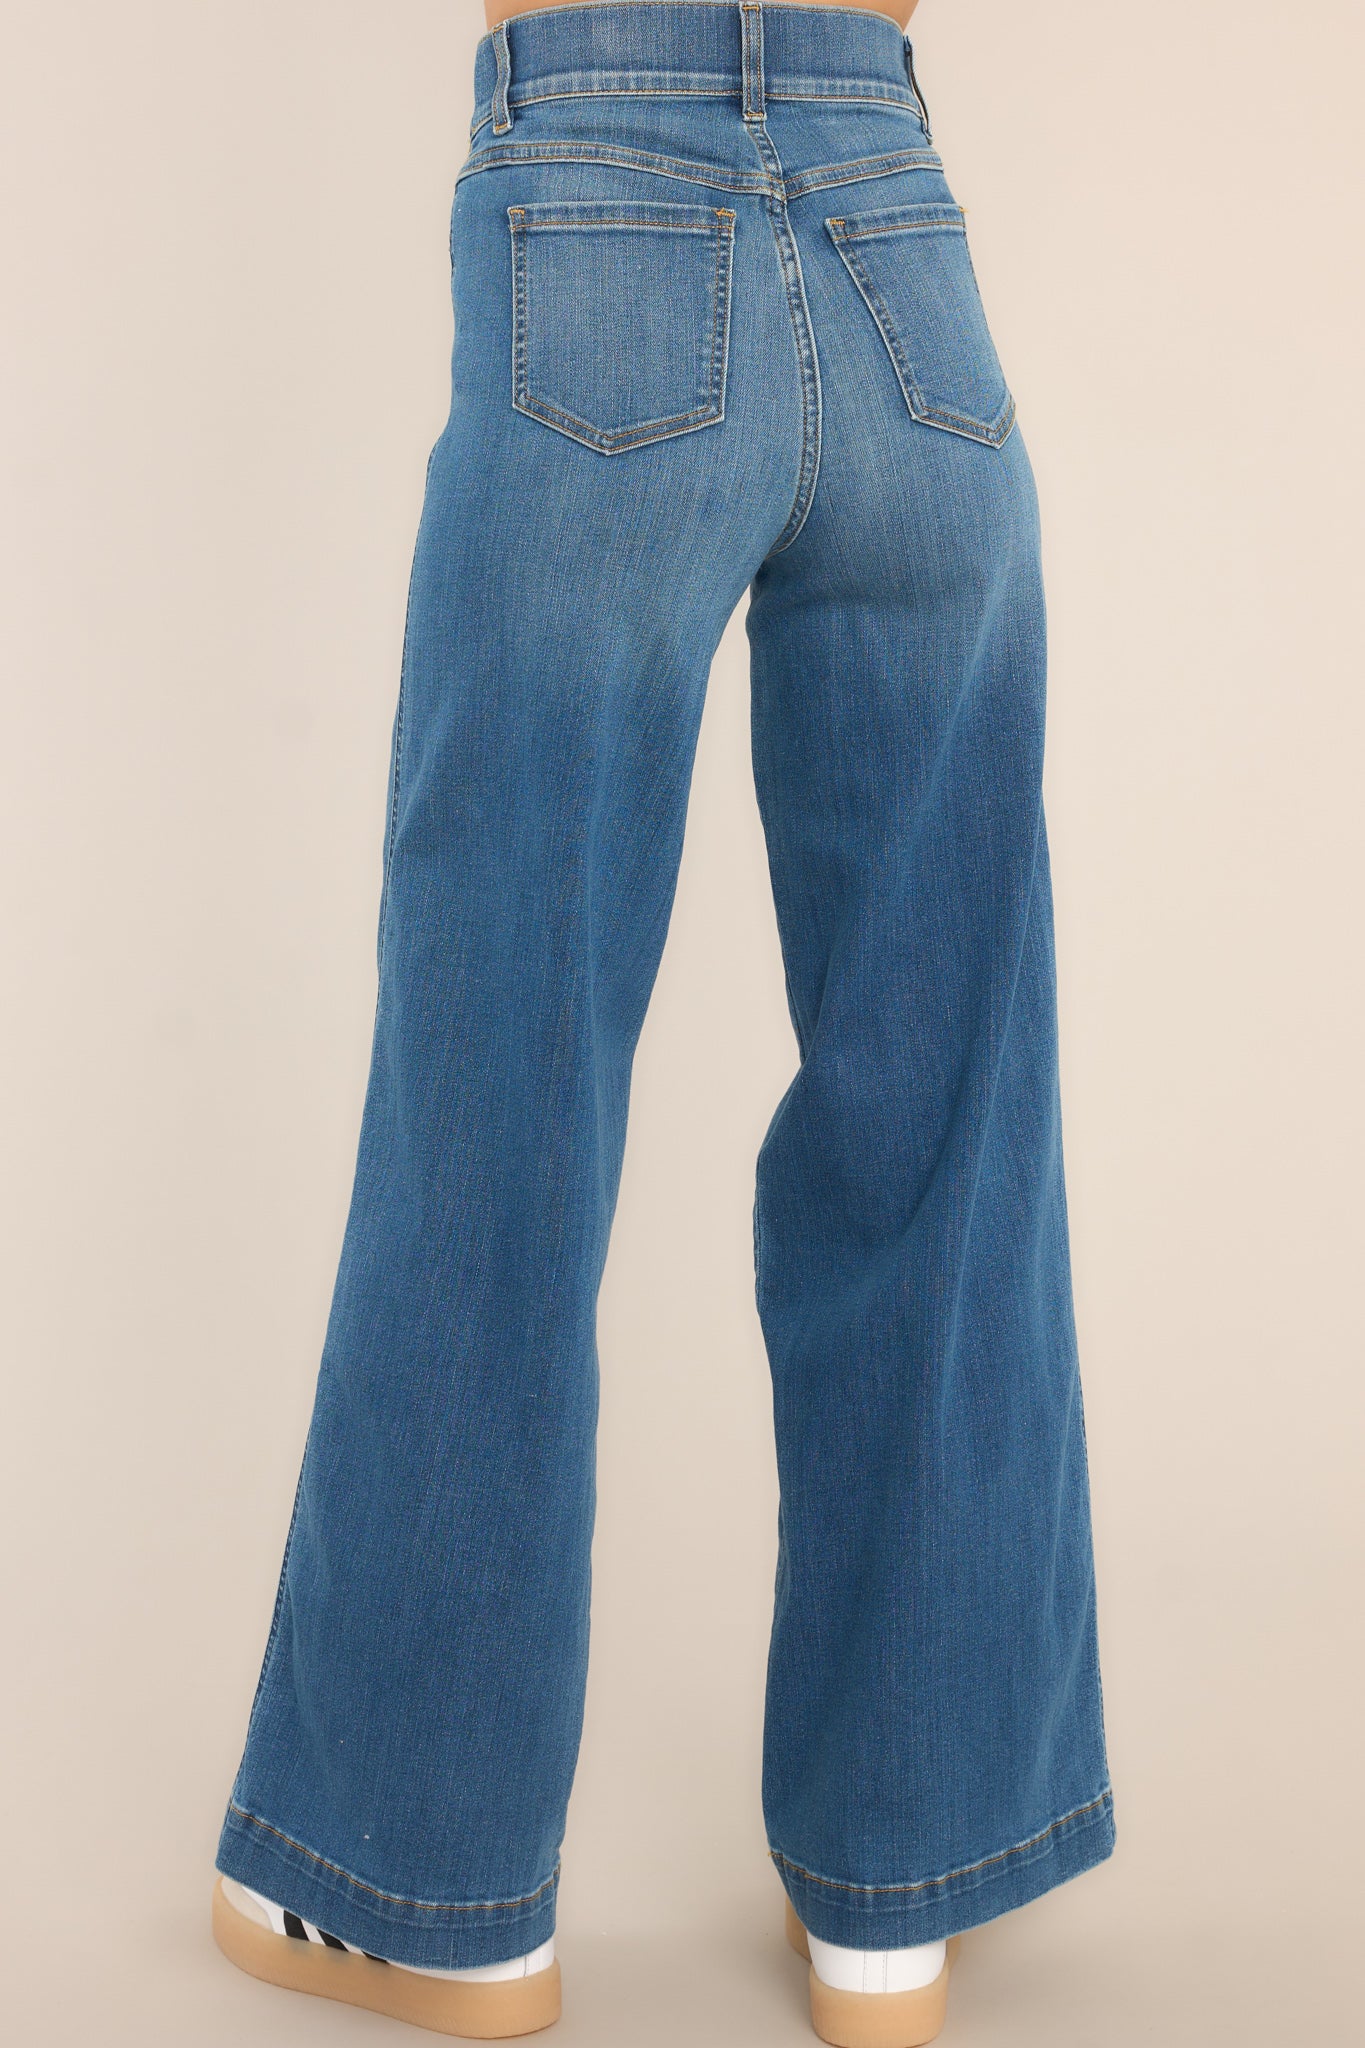 Wide Leg Jeans for Women High Waisted Button Fly Stretch Jeans